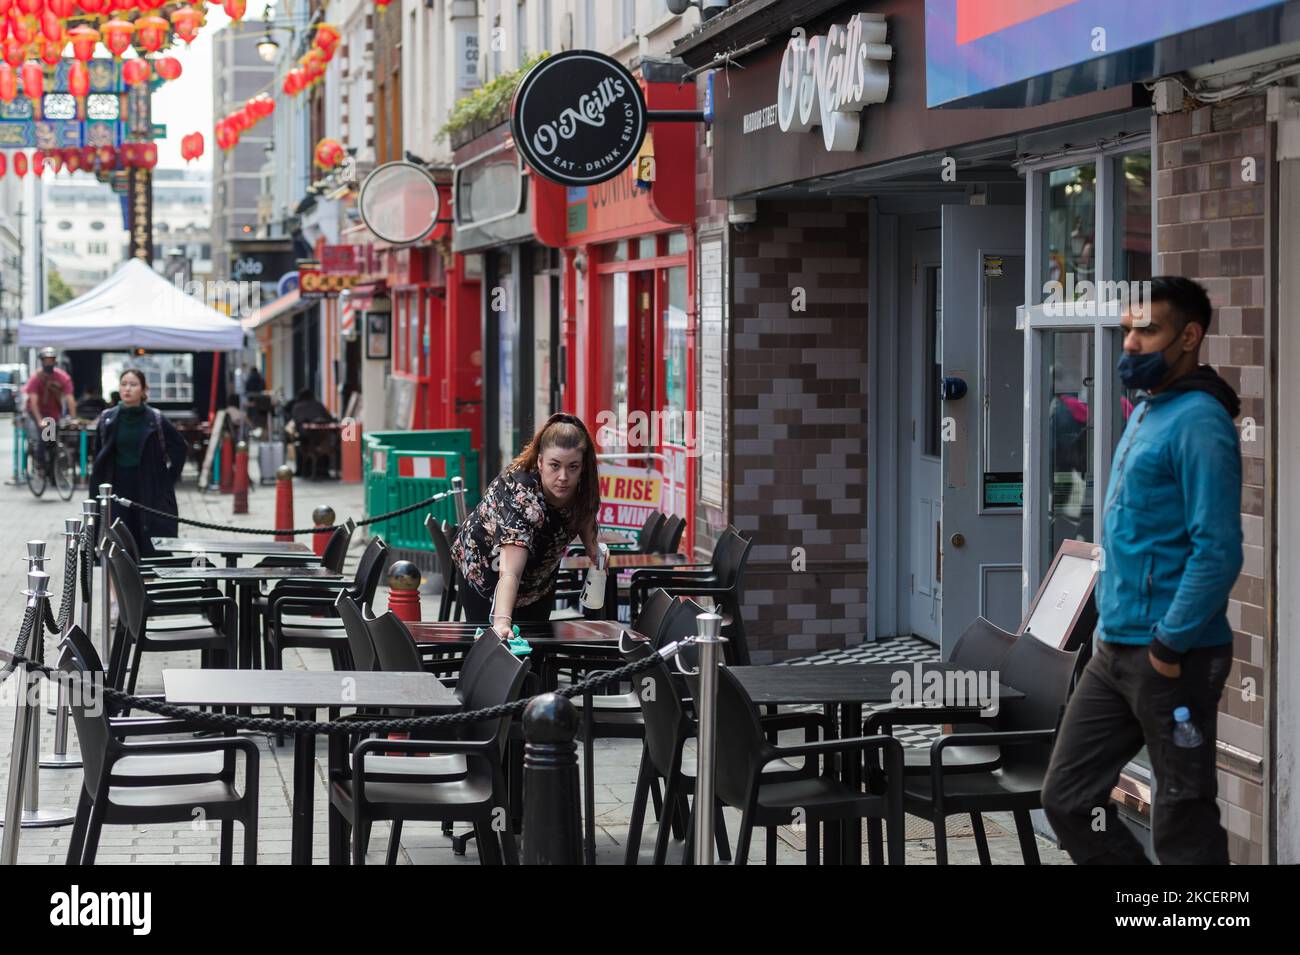 LONDON, UNITED KINGDOM - MAY 17, 2021: A waiter prepares tables outside a restaurant in Soho as England moves to Step 3 in easing of coronavirus restrictions, on 17 May, 2021 in London, England. From today indoor hospitality and entertainment venues are allowed to re-open, six people or two households can meet indoors and international travel without need for quarantine resumes to 12 green list countries, however there are concerns that the surge in cases of the Indian Covid variant may delay the fourth stage of easing lockdown on June 21. (Photo by WIktor Szymanowicz/NurPhoto) Stock Photo